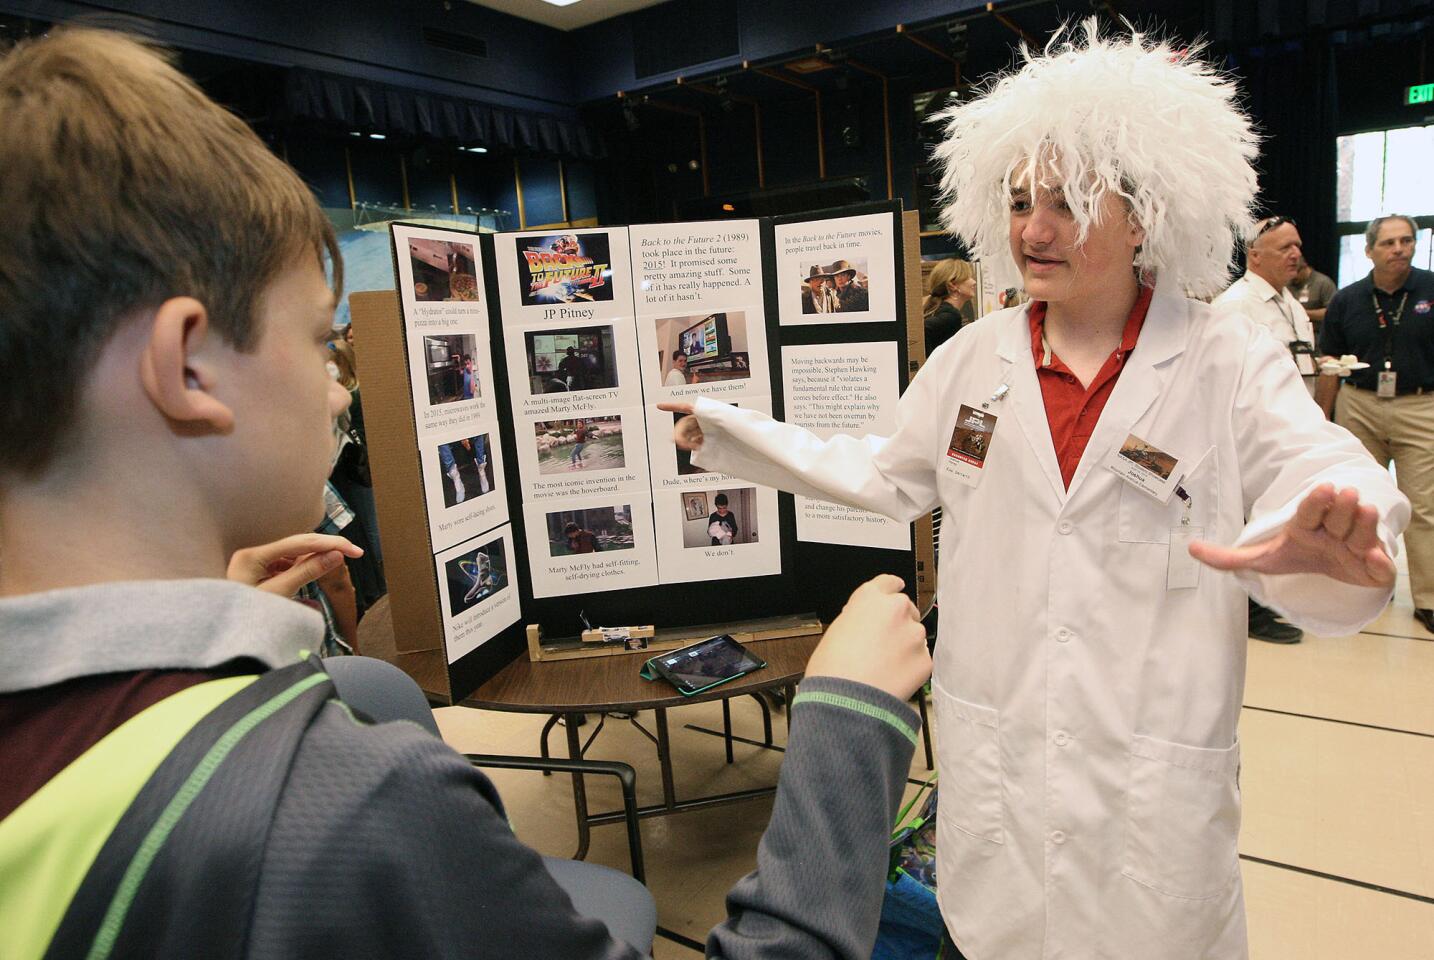 Mountain Ave. Elementary student Joshua Pitney, 13, discusses the theory of time travel as seen in the movie "Back to the Future" during the L.A. County Science Fair at NASA's Jet Propulsion Laboratory on Tuesday, April 14, 2015.